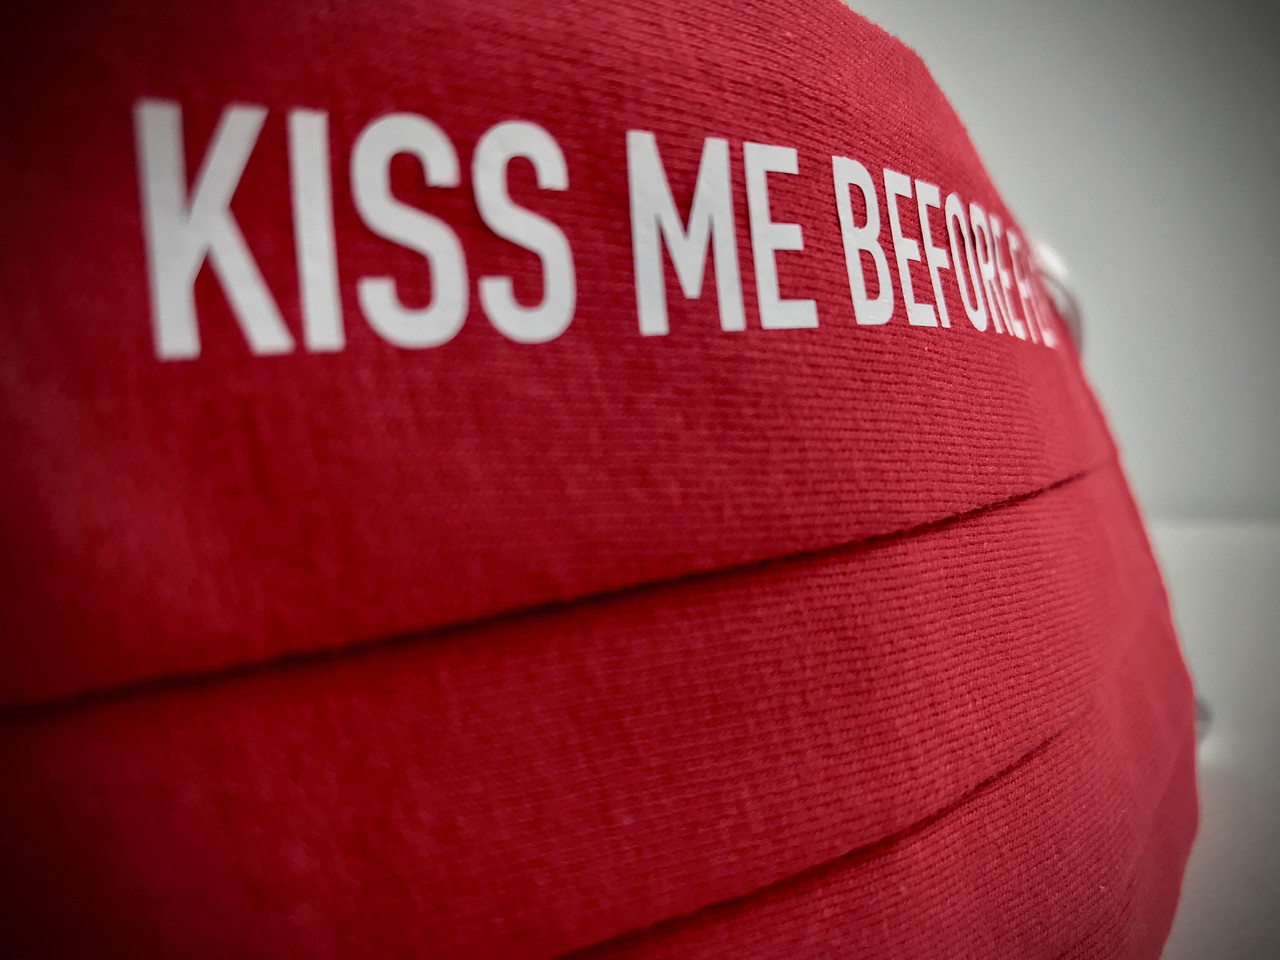 Reusable Aviation Mask: "KISS ME BEFORE FLIGHT" (Colour: RED) (Mask-6)